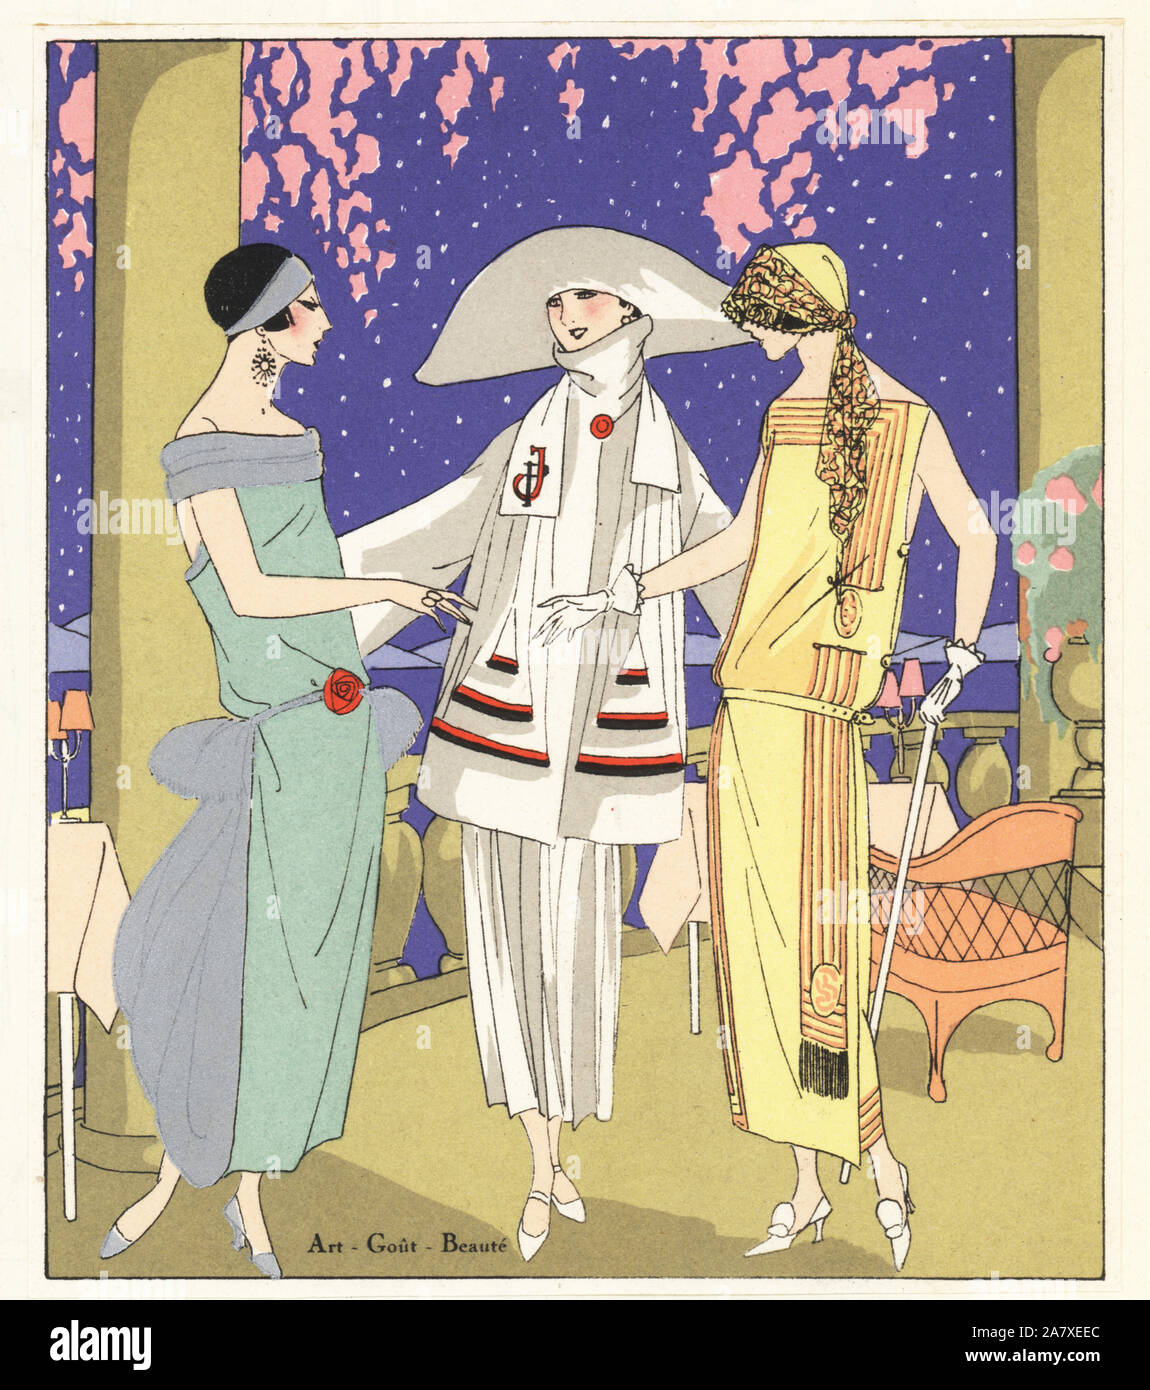 Women at an evening party. One wearing a jade crepe dress, three-piece in white lainage, and gold crepe dress with coral decoration. Handcolored pochoir (stencil) lithograph from the French luxury fashion magazine Art, Gout, Beaute, 1923. Stock Photo